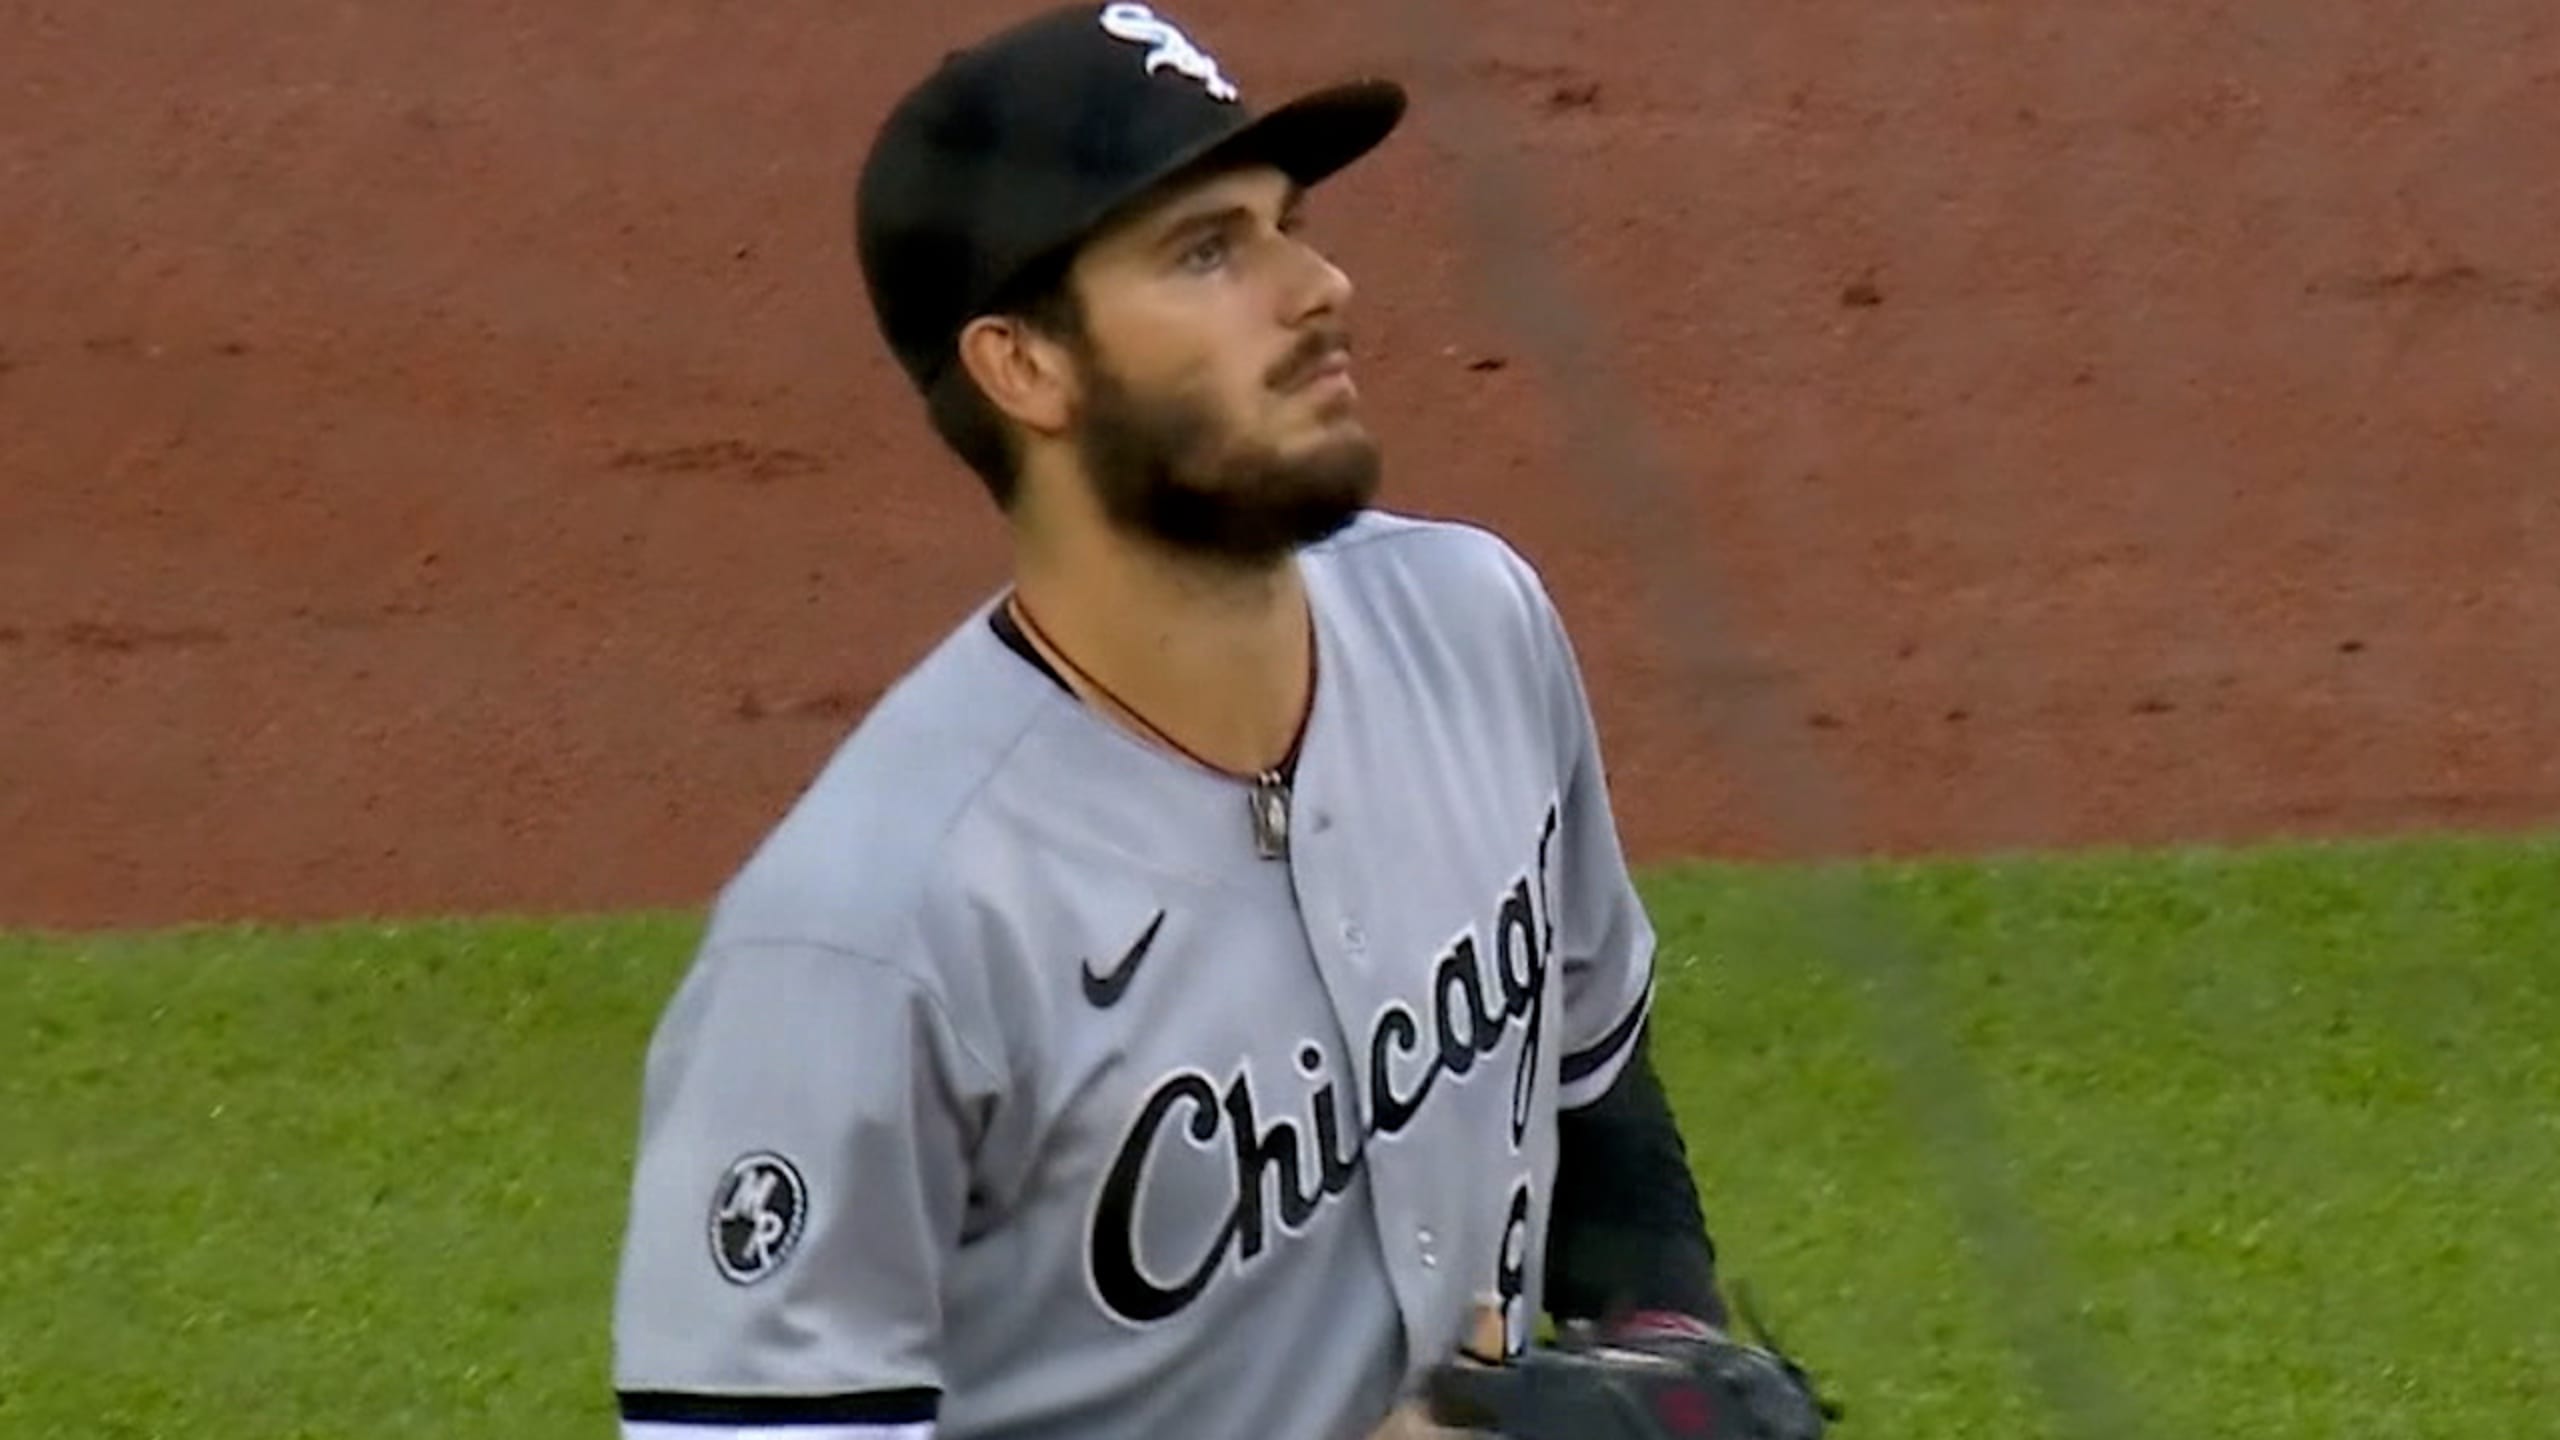 Dylan Cease deals, White Sox beat Blue Jays in extras – NBC Sports Chicago